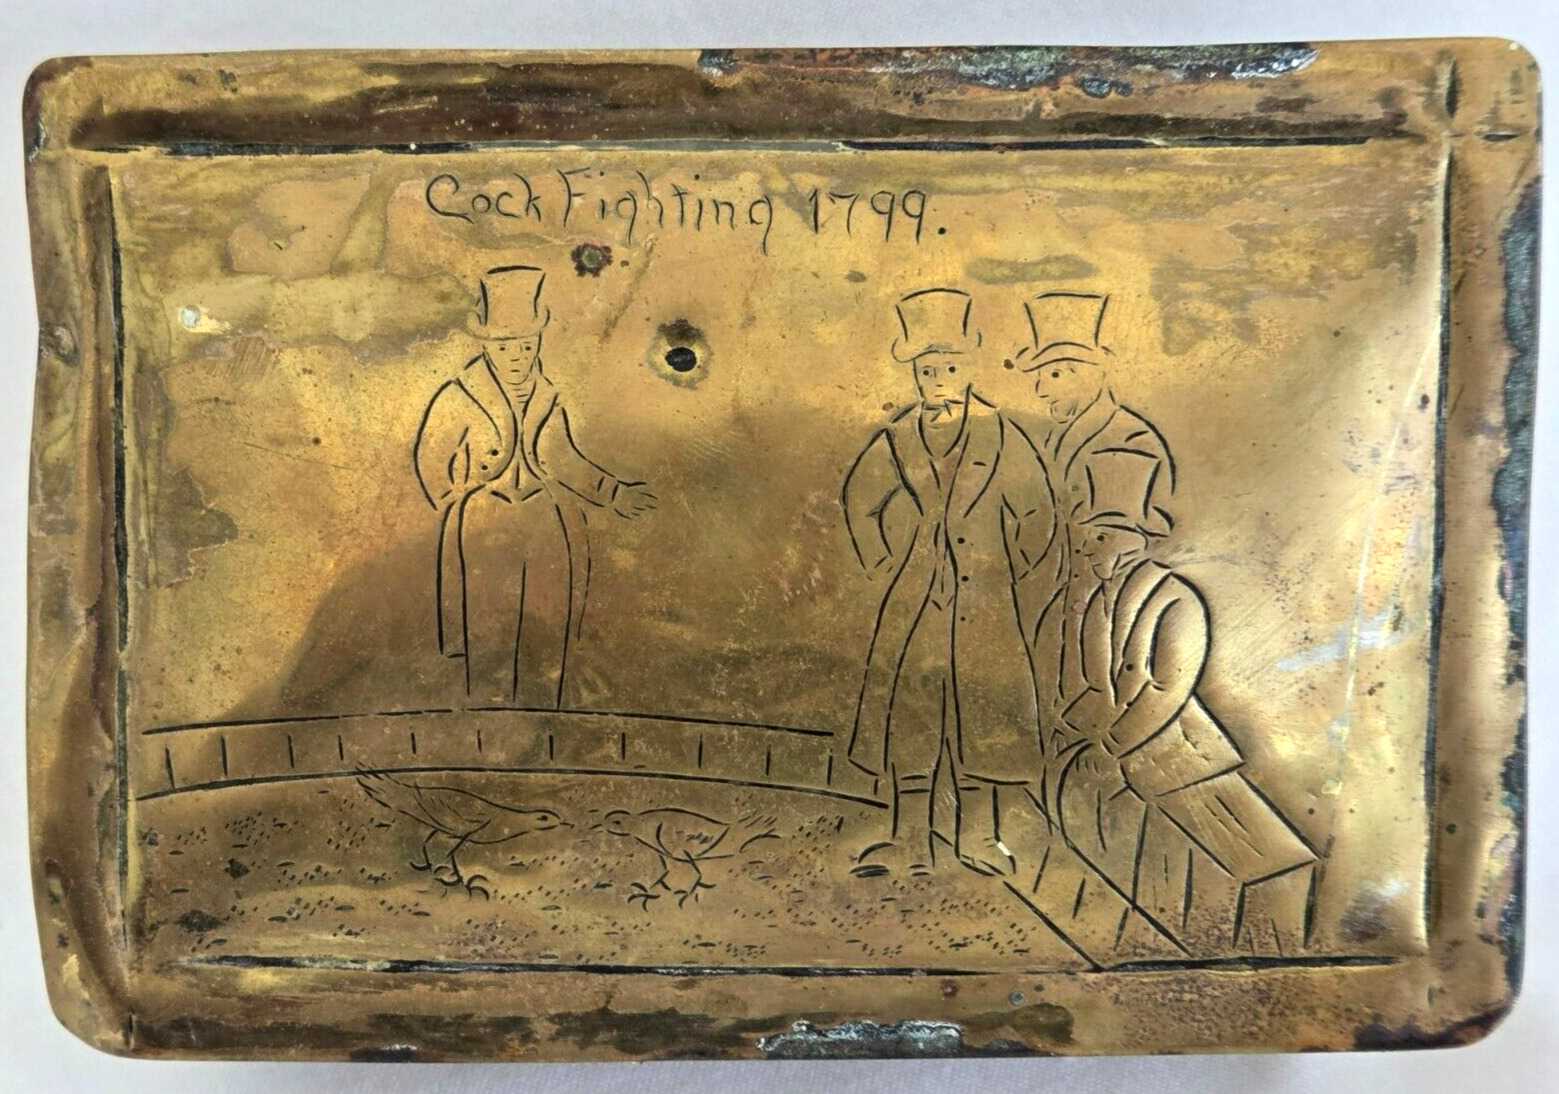 ANTIQUE,18th CENTURY,1700's,BRASS,SNUFF,TOBACCO BOX, COCK FIGHTING 1799, LARGE